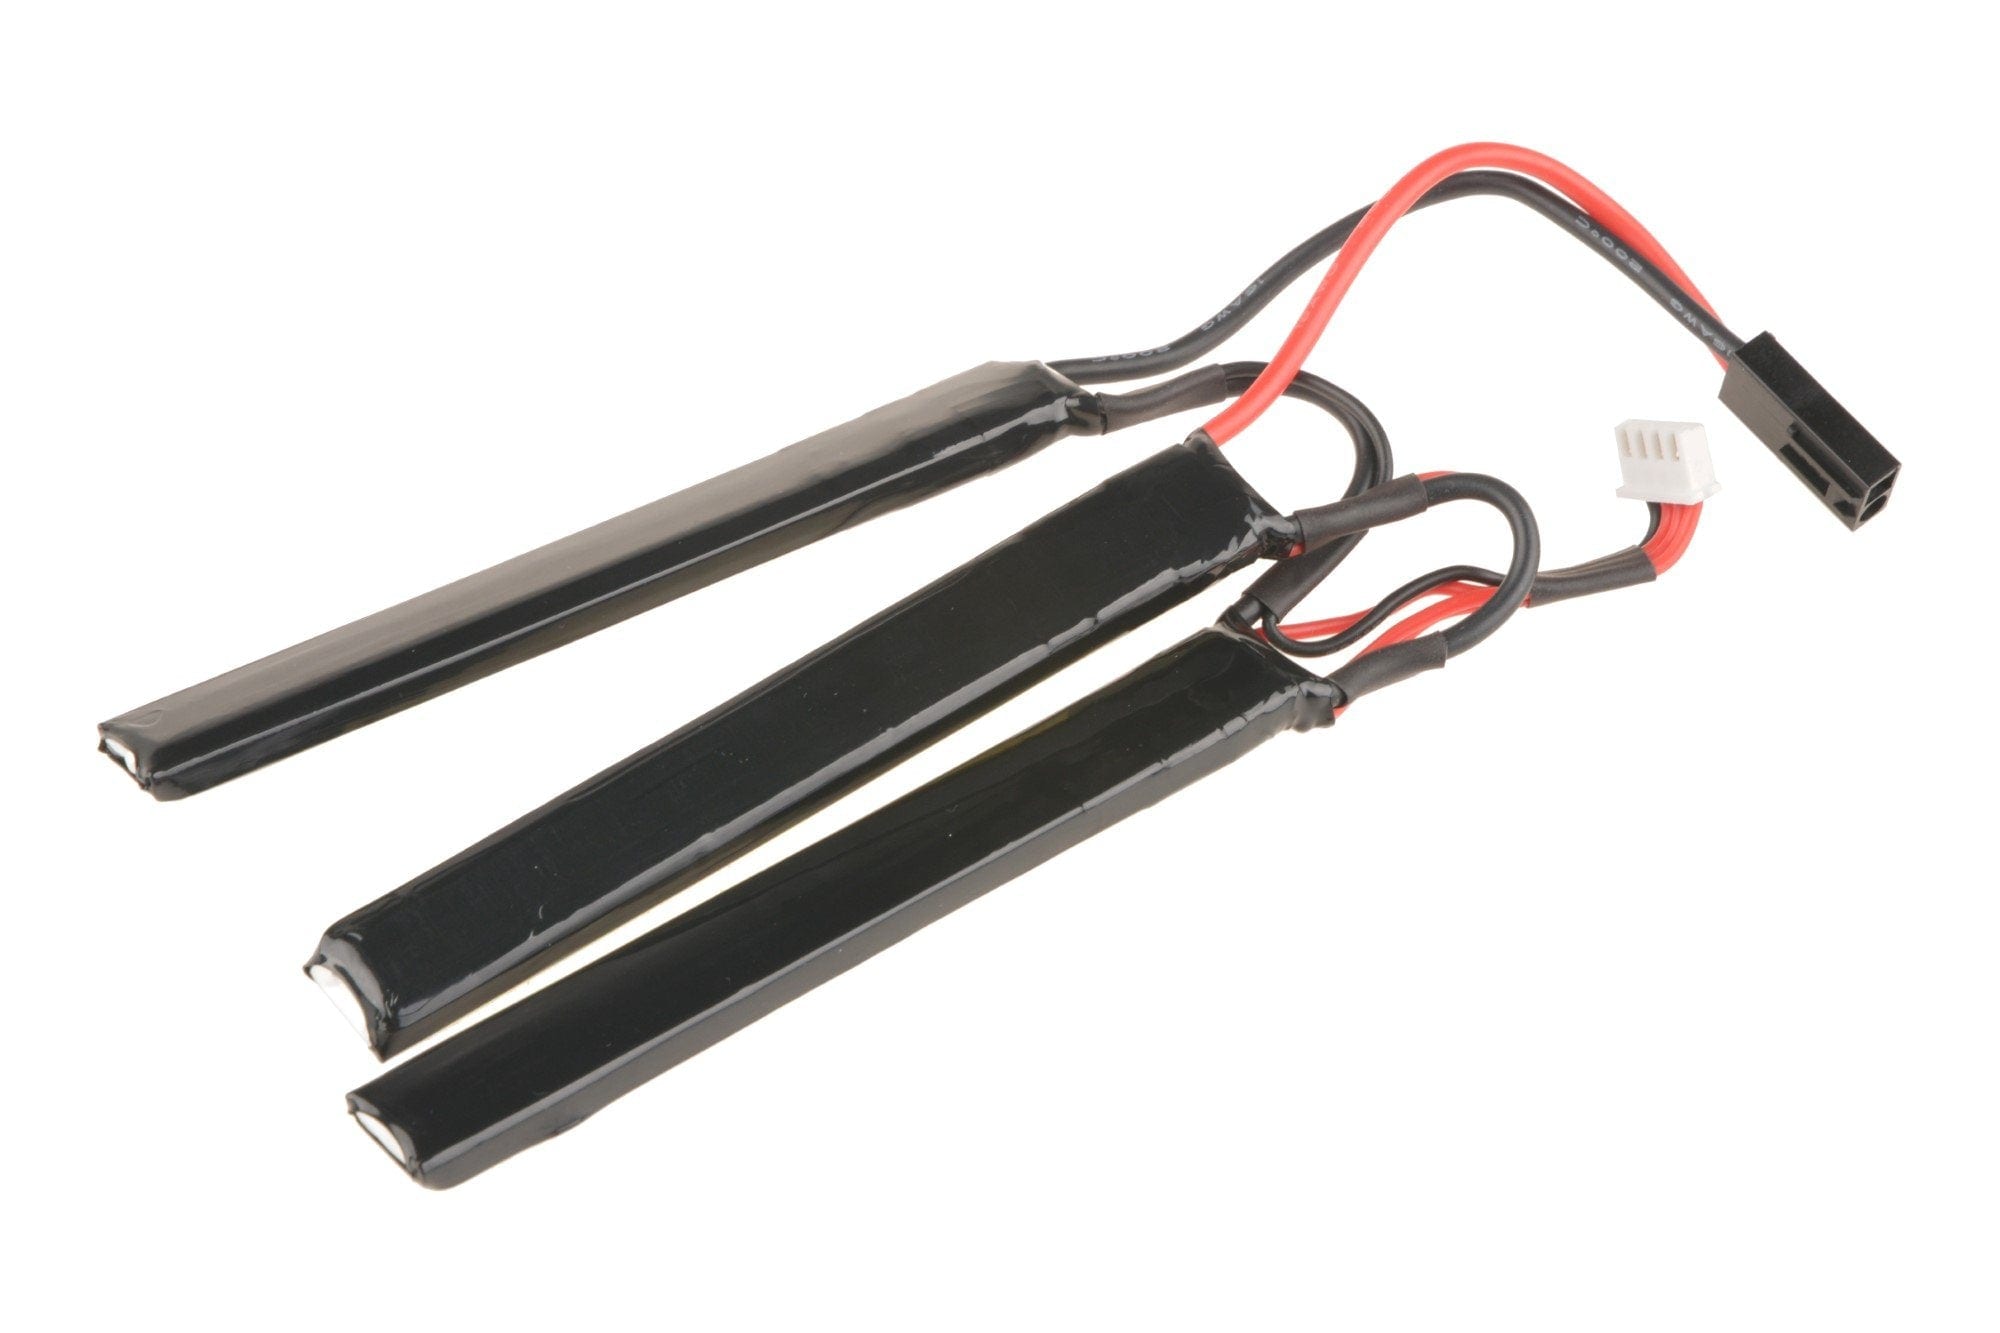 LiPo 11.1V 1200 mAh 25/50C Butterfly Battery by Electro River on Airsoft Mania Europe